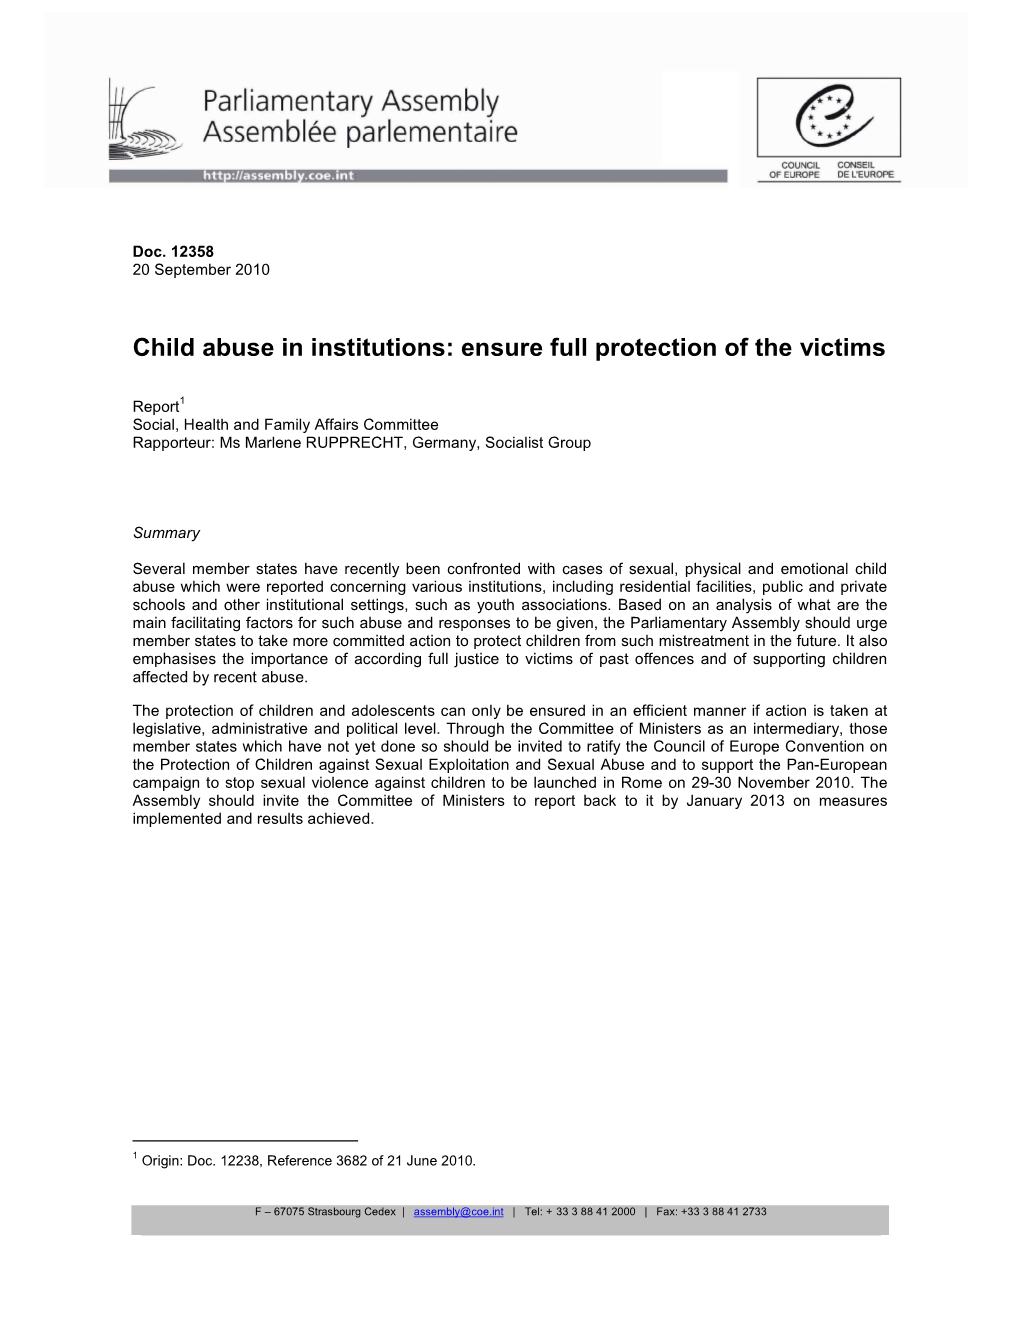 Child Abuse in Institutions: Ensure Full Protection of the Victims